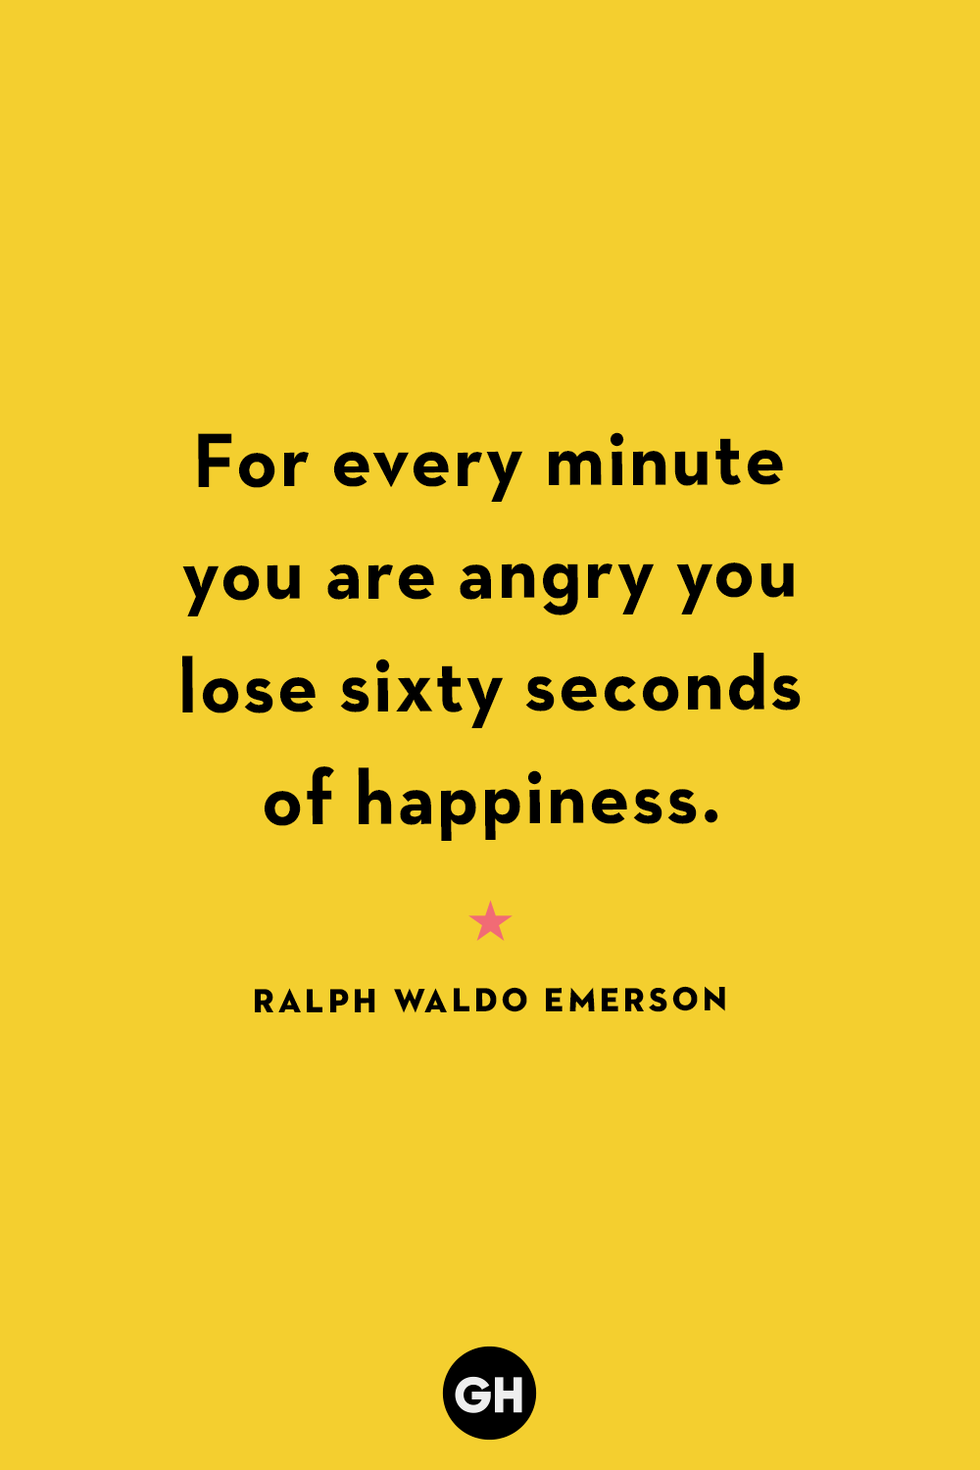 Happiness Quotes: 81 Quotes About Happiness and Finding Joy in Life